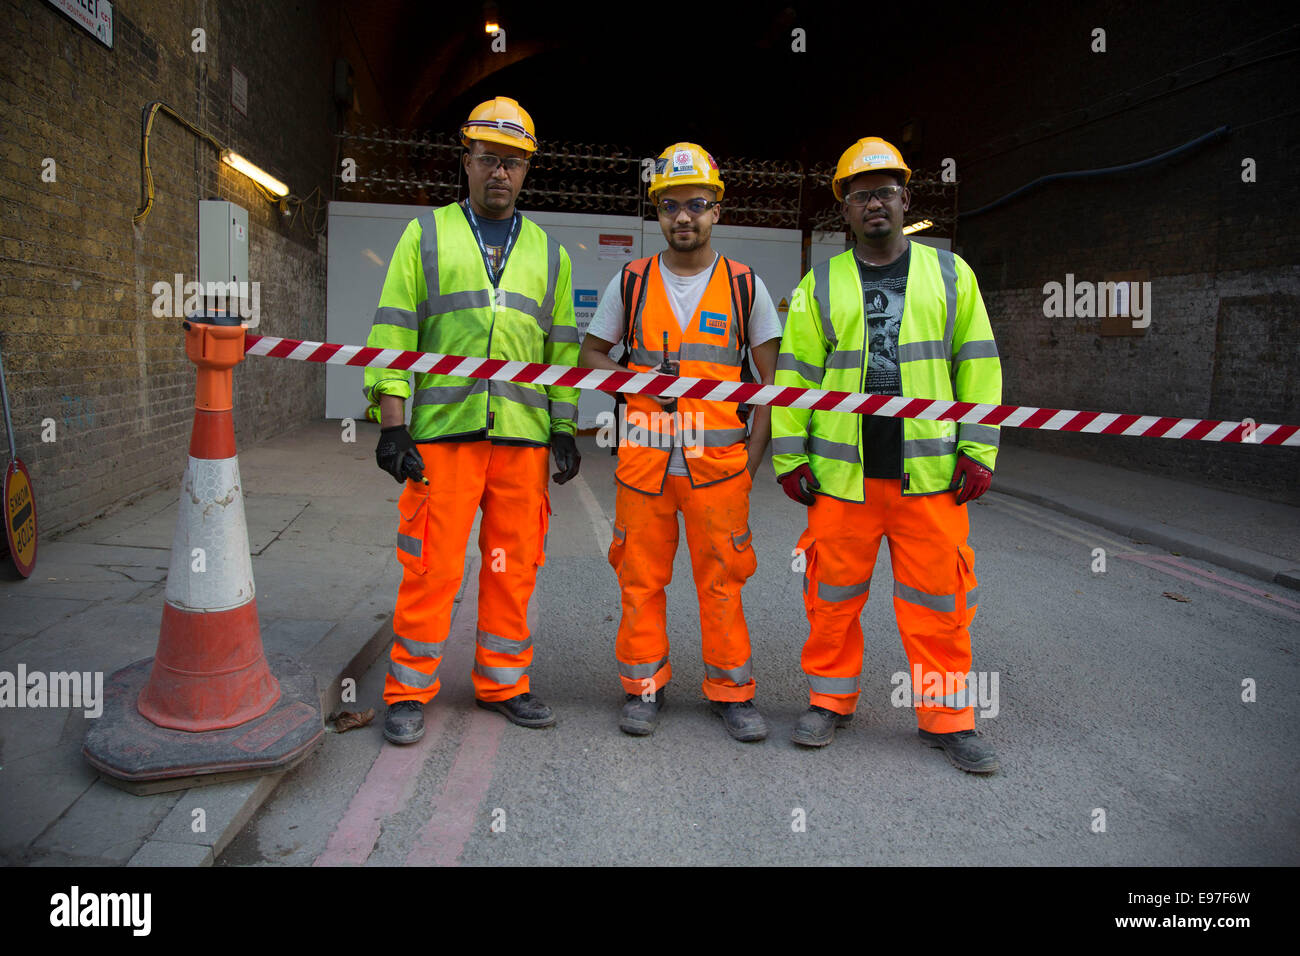 Workmen wearing high viz safety clothing at the construction site on